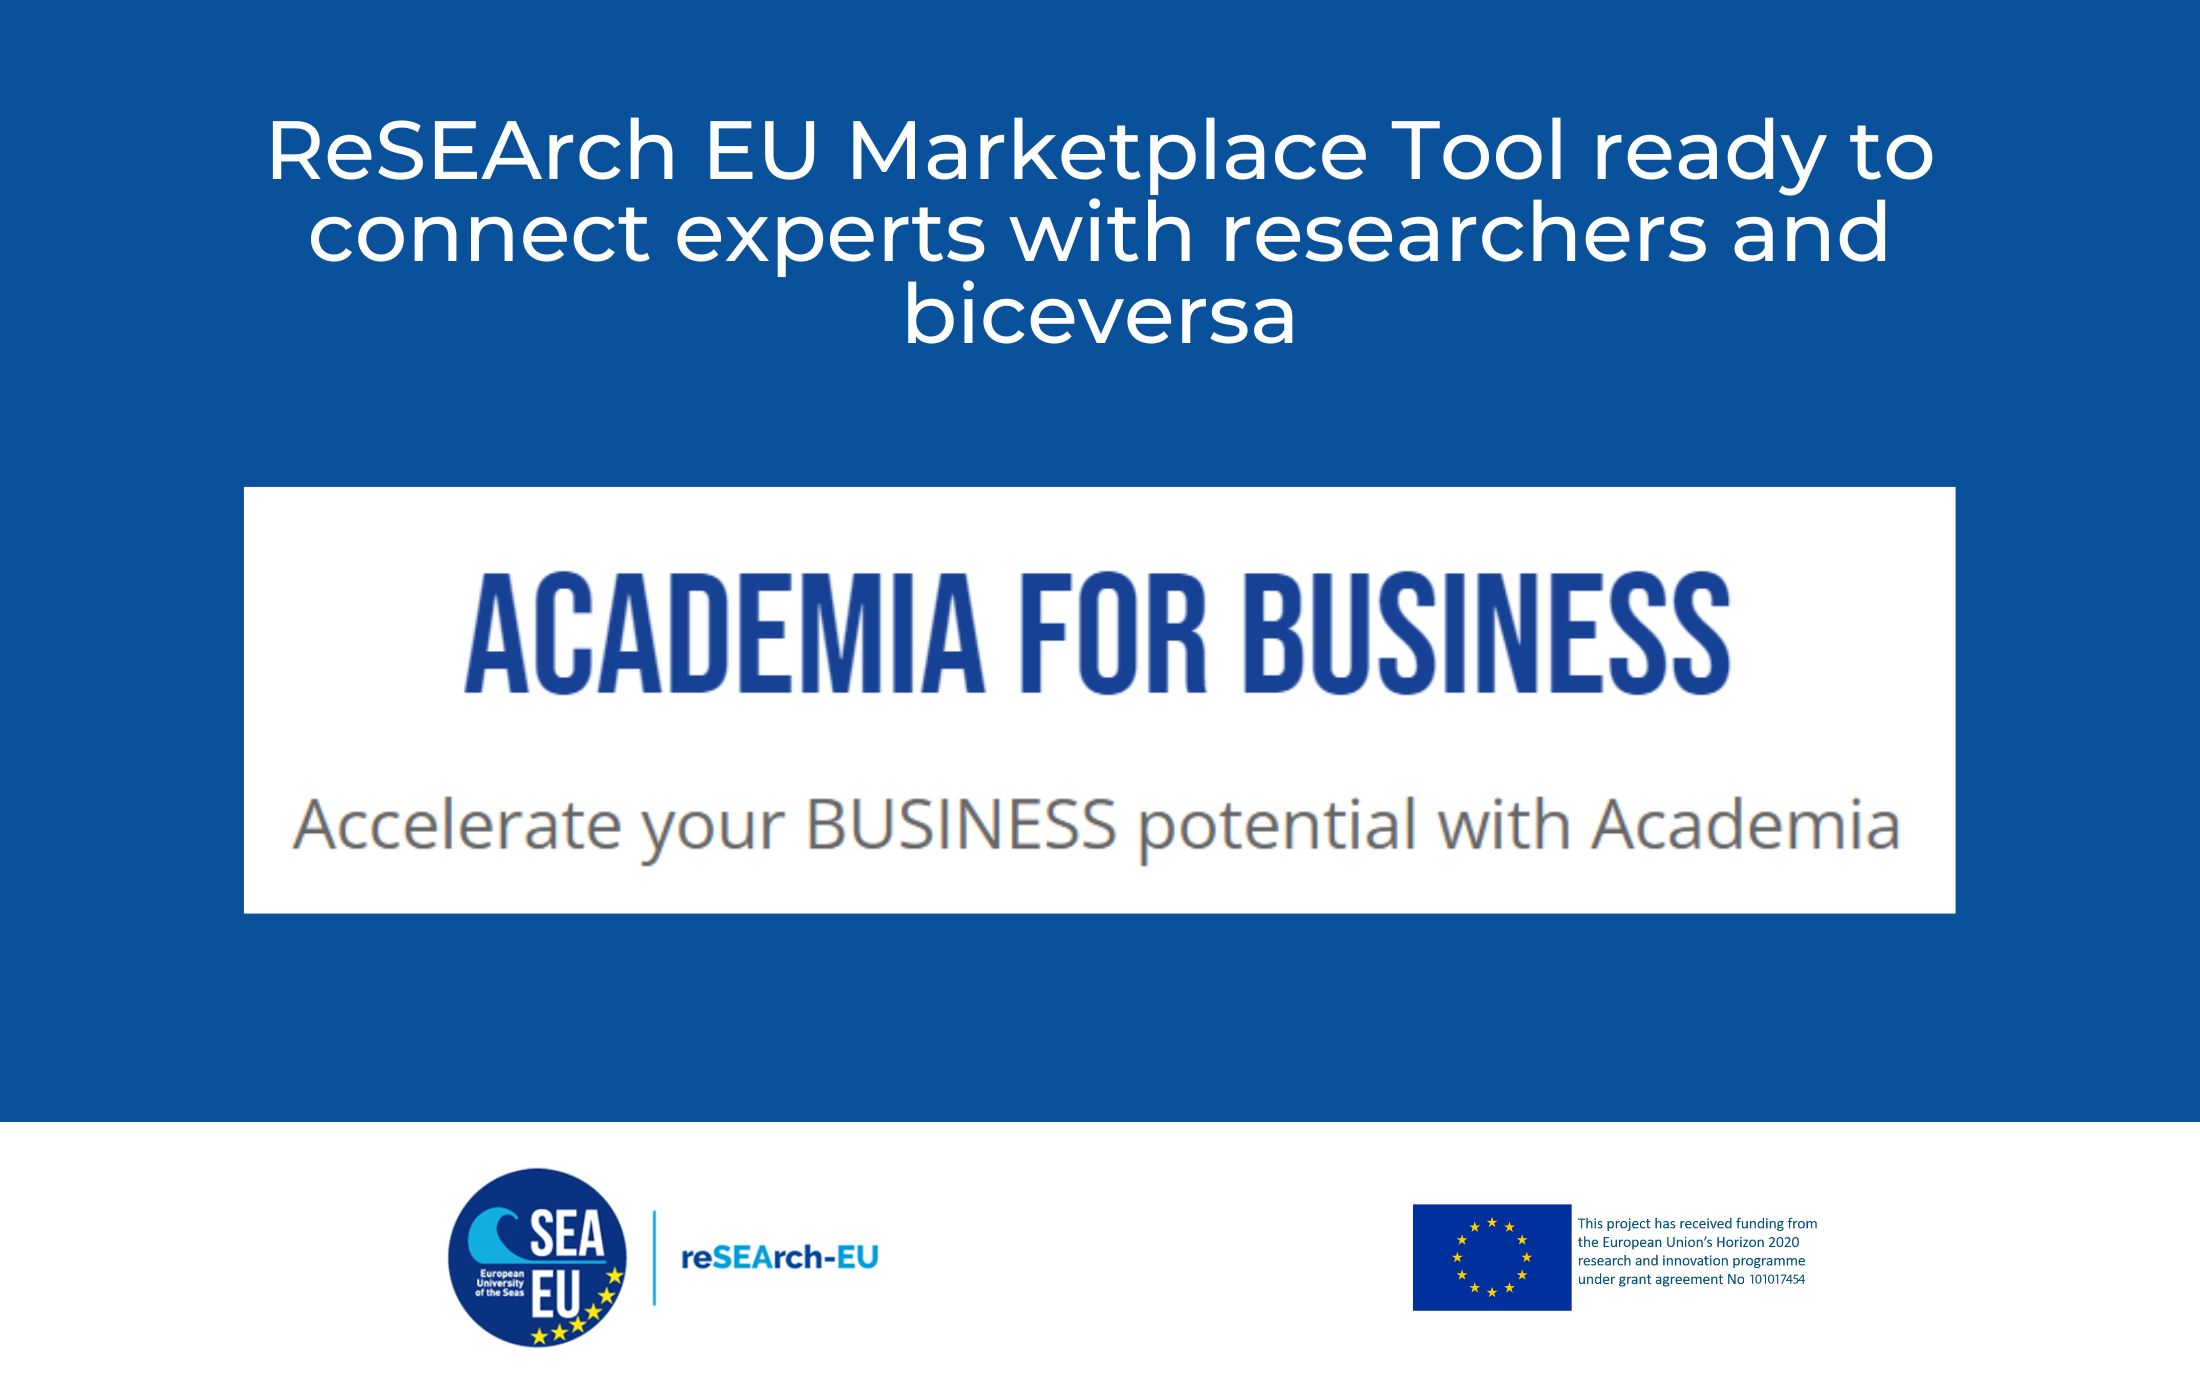 ReSEArch EU Marketplace Tool ready to connect experts with researchers and biceversa